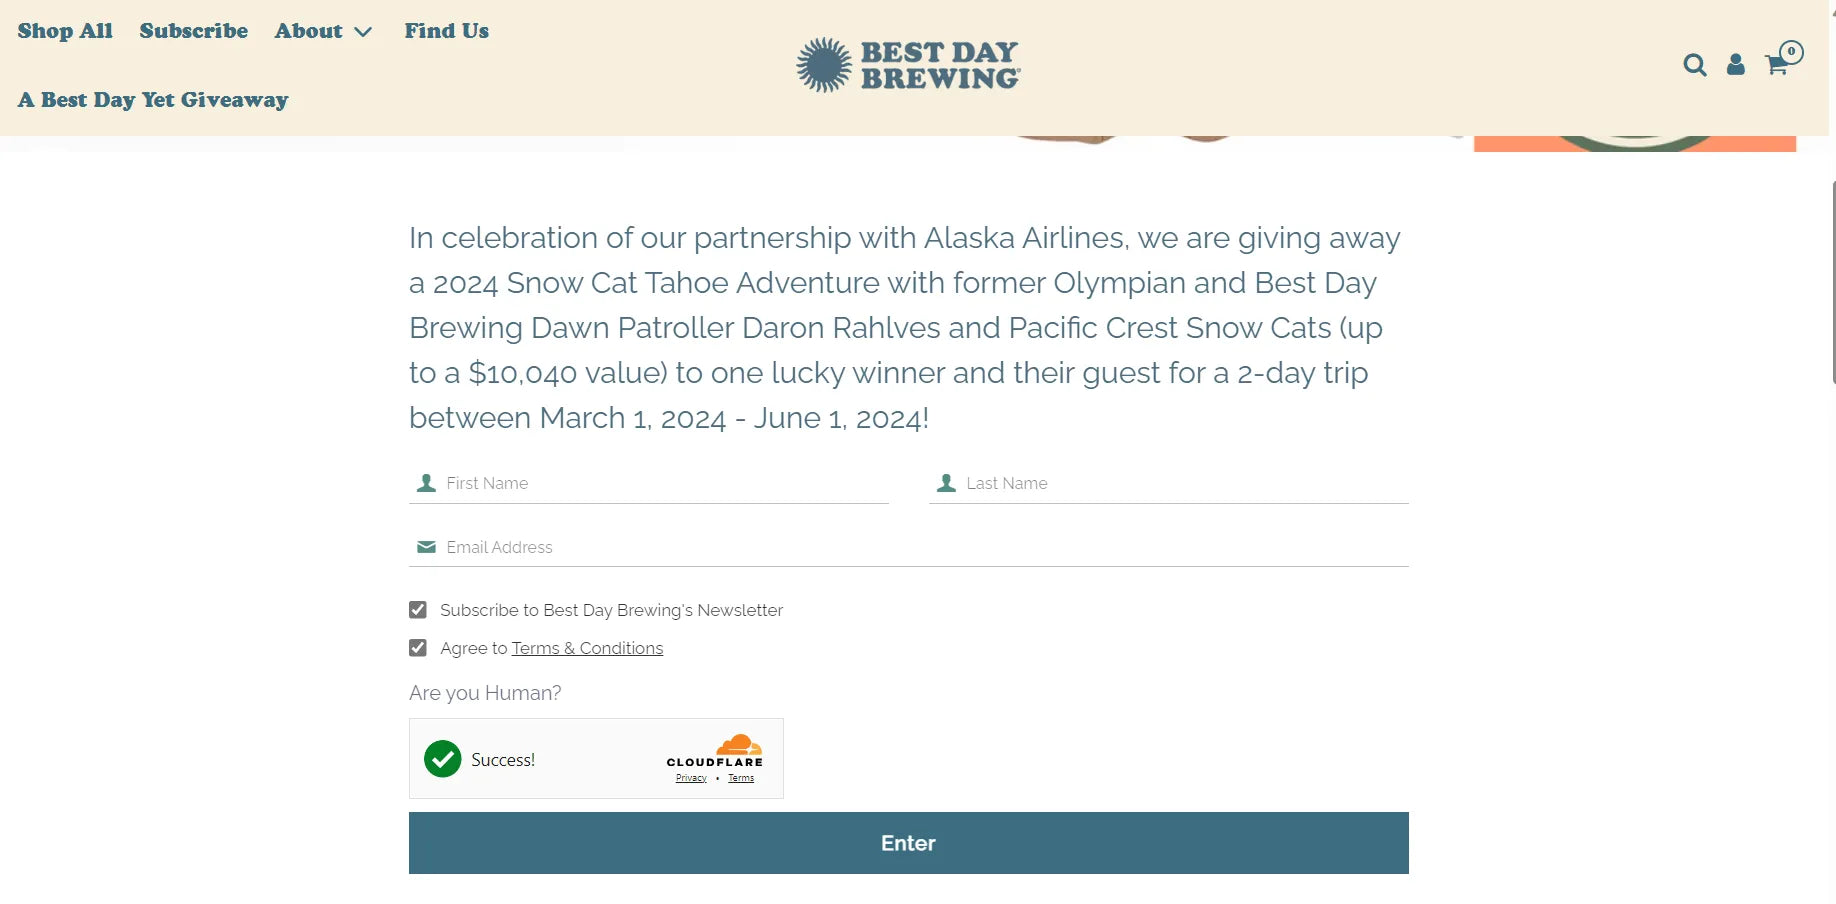 A screenshot of Best Day Brewing’s lead generation landing page.